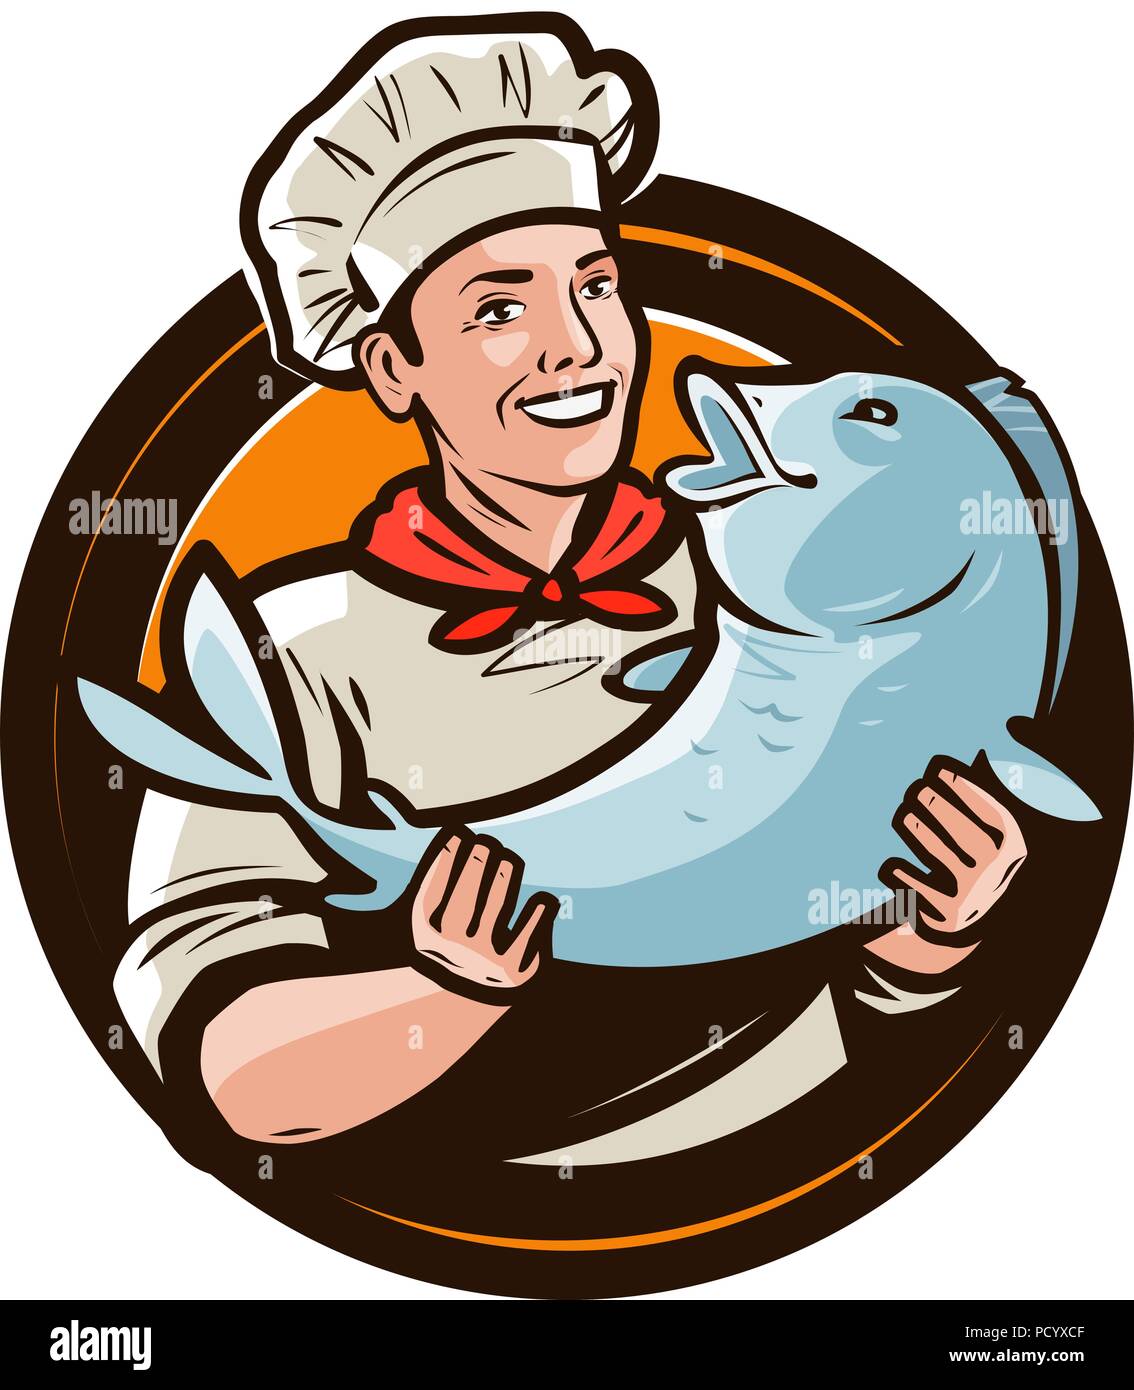 Cheerful cook with fish. Seafood, food logo or label. Cartoon vector illustration Stock Vector